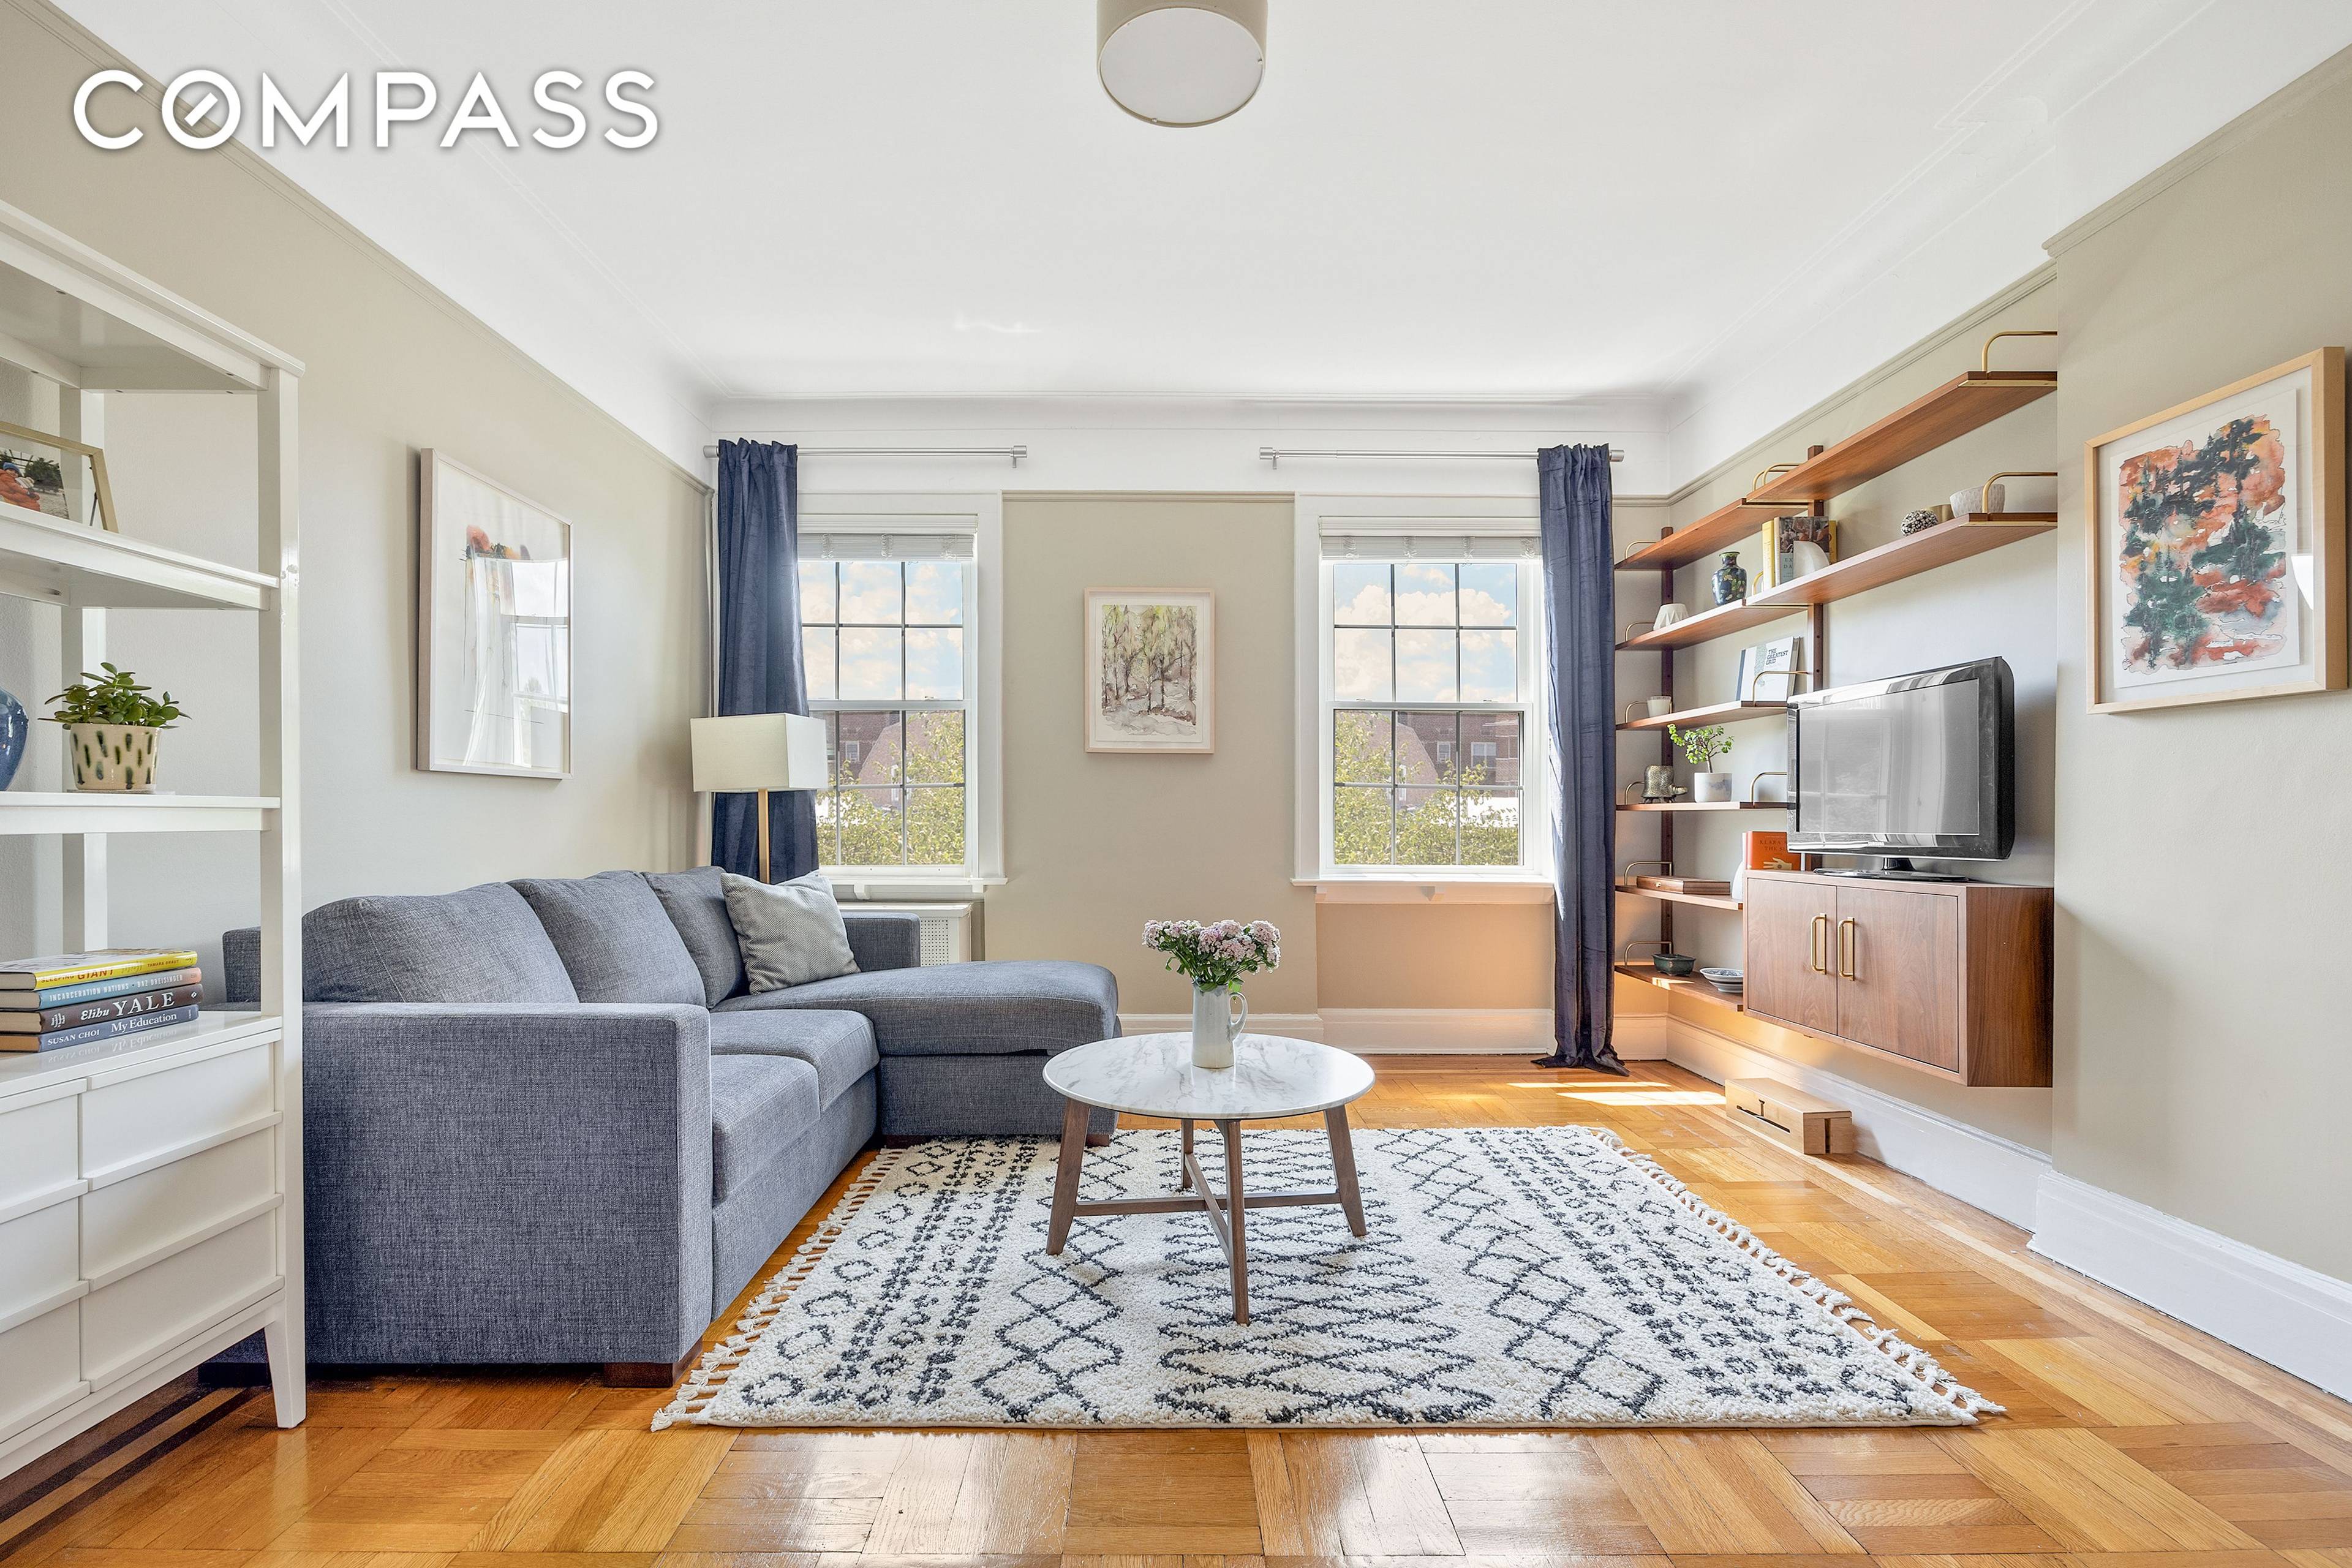 Sun splashed interiors and a stunning common roof deck await in this expansive one bedroom pre war co op in an exceptional North Park Slope location.